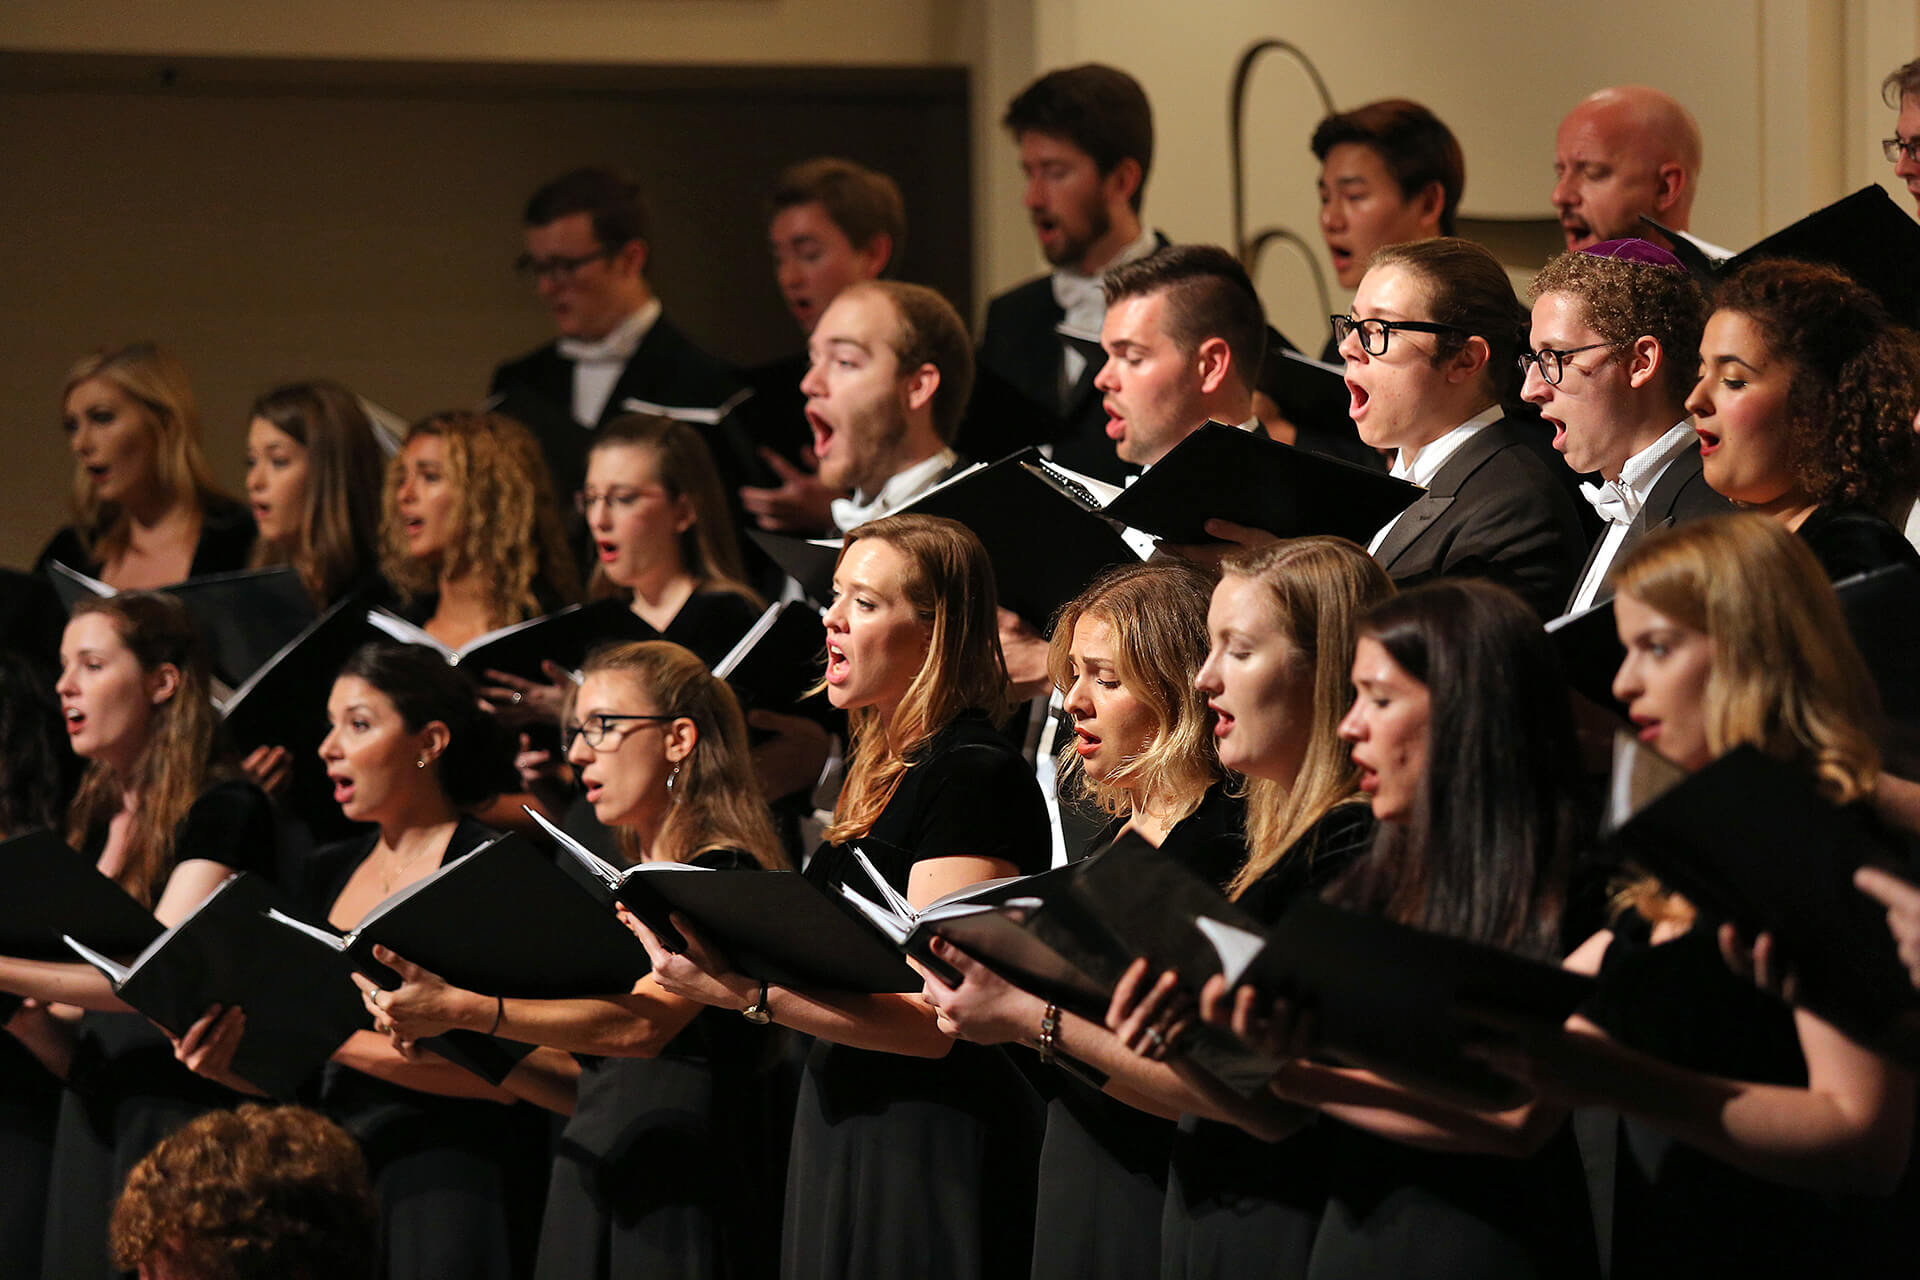 Chamber Singers - Brahms' Requiem with Long Beach Symphony